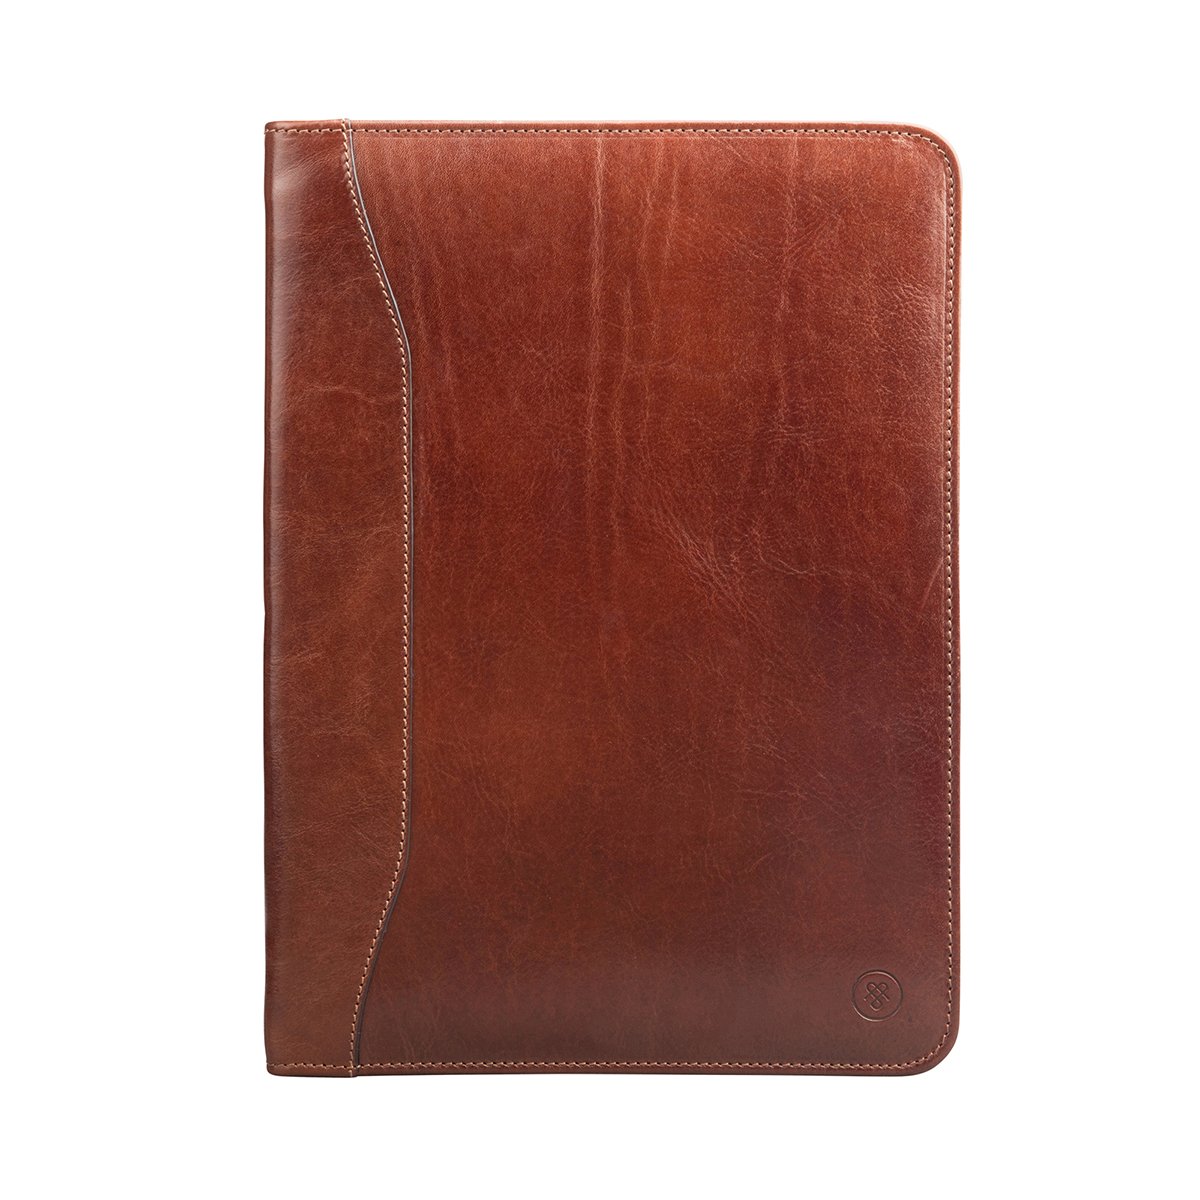 Leather Padfolio Personalized for Him/her Leather Portfolio Zipper A4  Documents for Office/meetings/interviews, Graduation/christmas GIFT. 